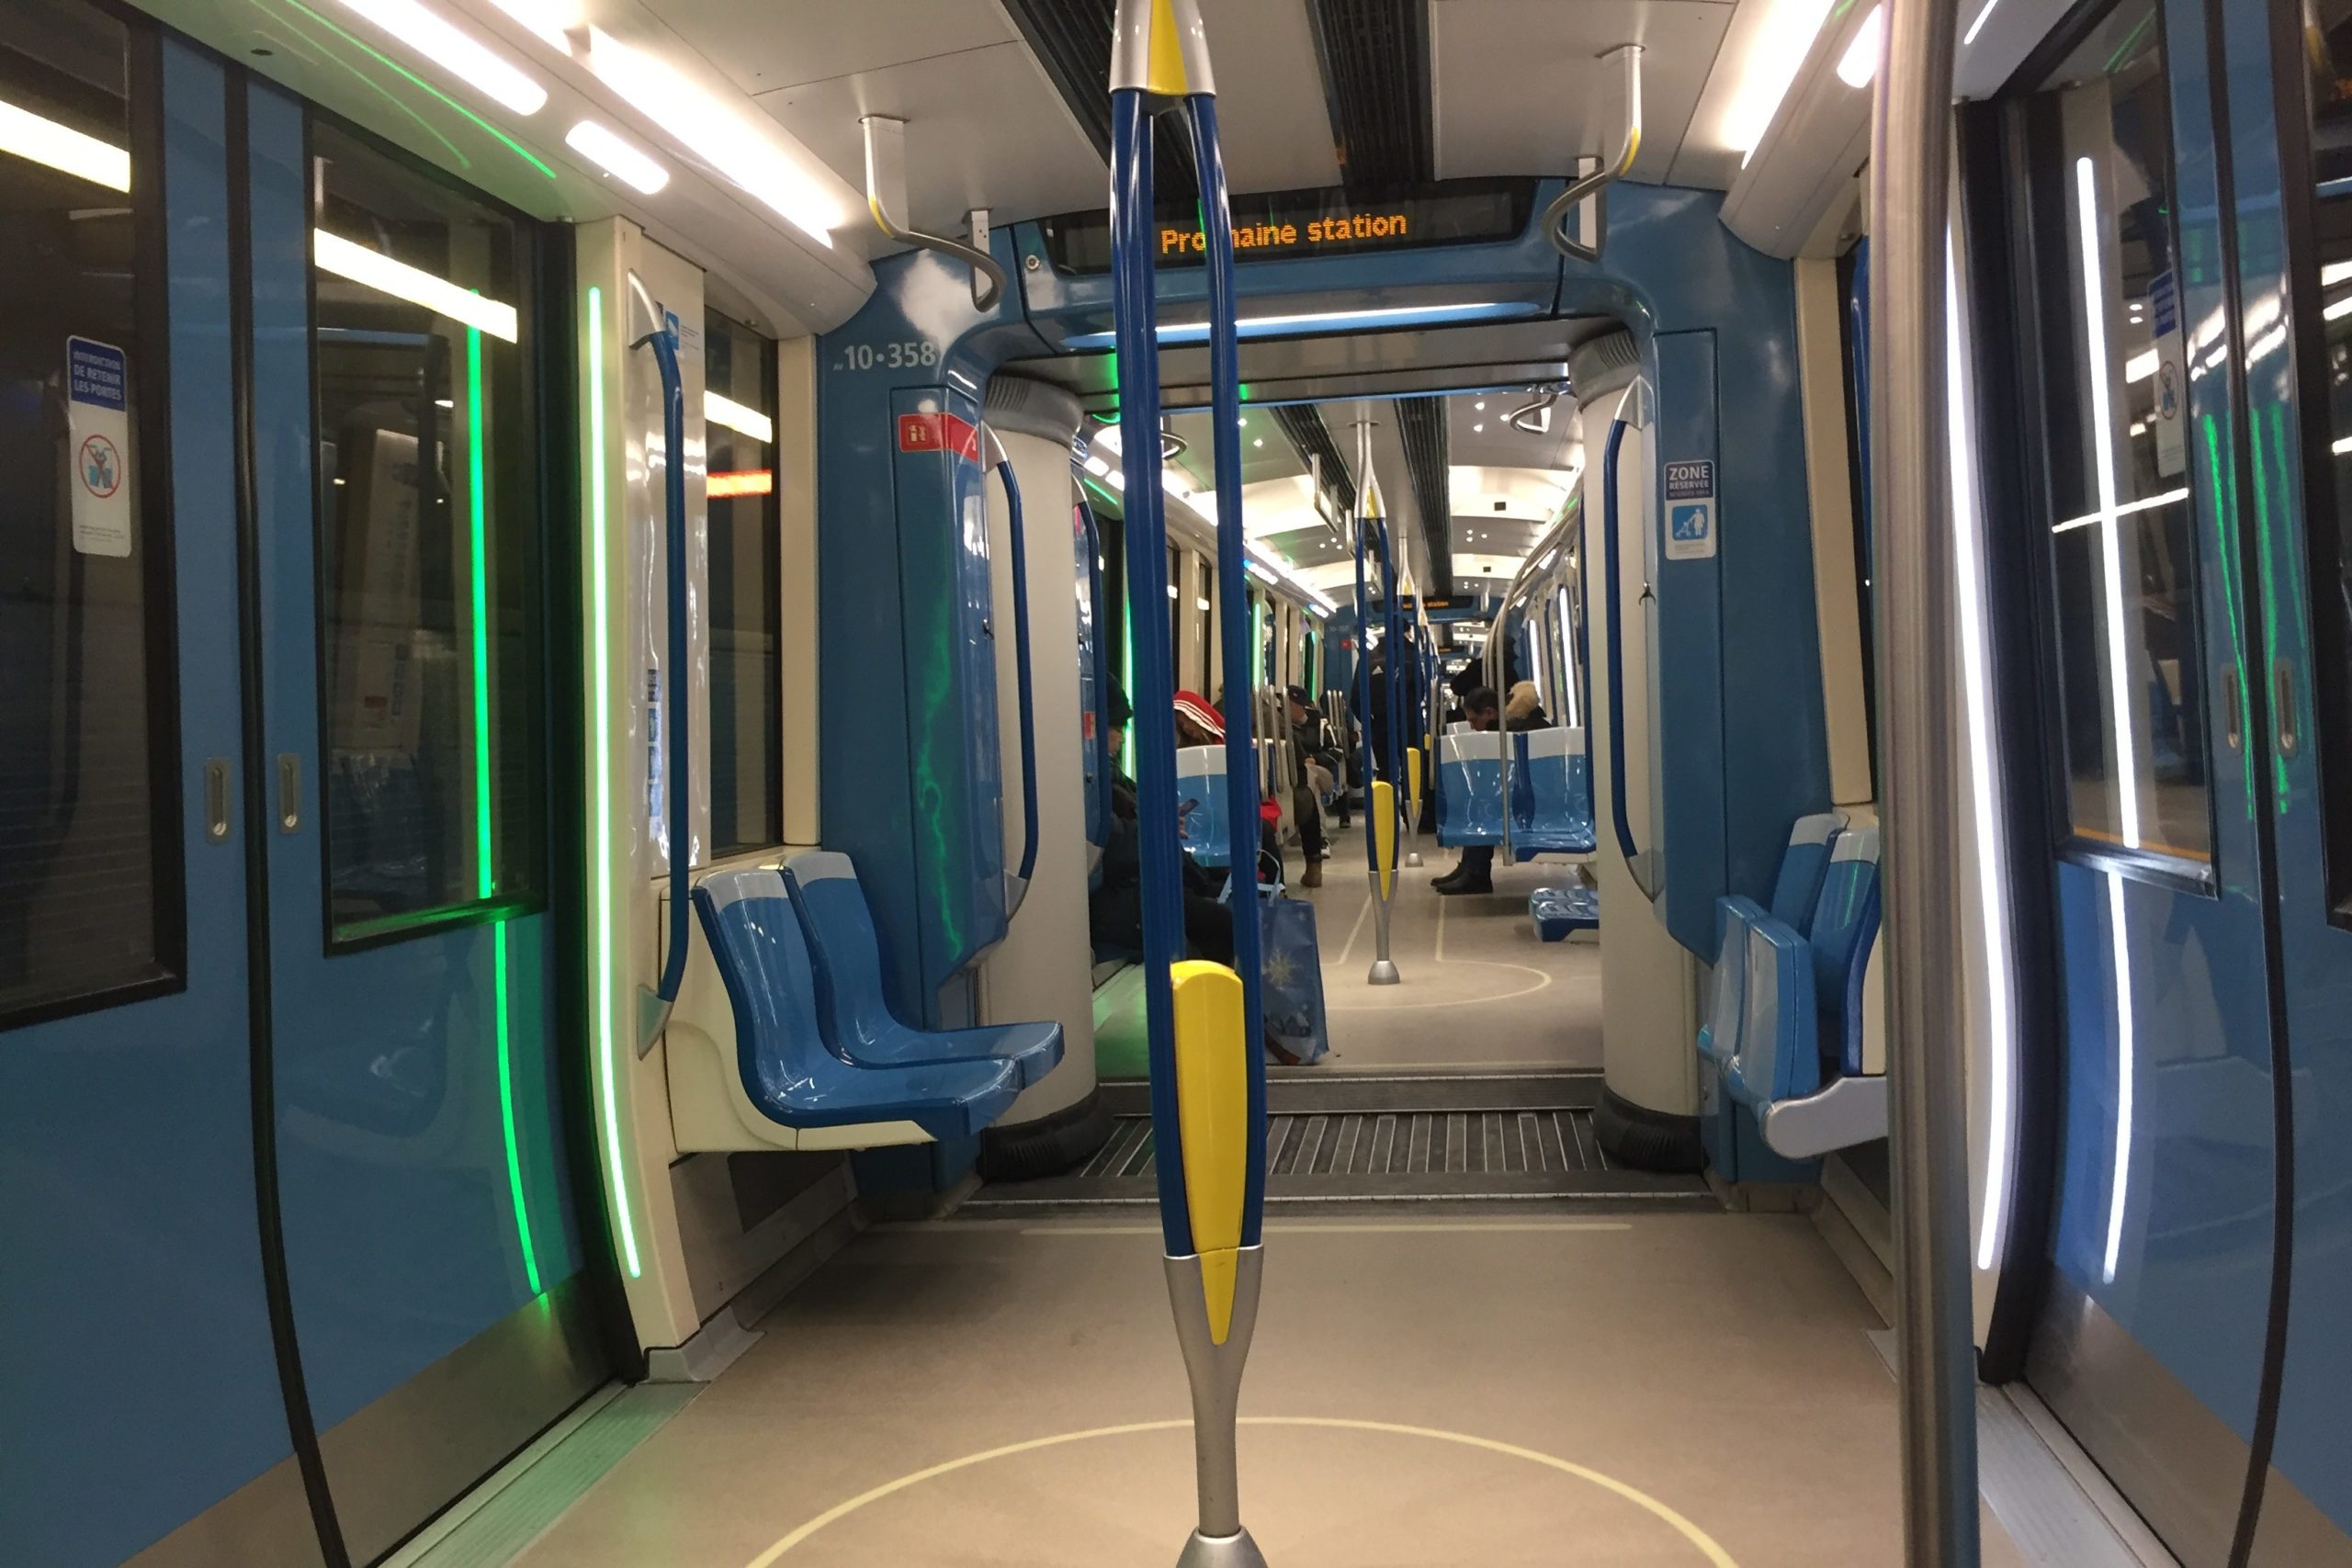 Lights beside the doors on the left are lit in green to indicate they will open at the next station. The doors on the right side of the train are lit in white.